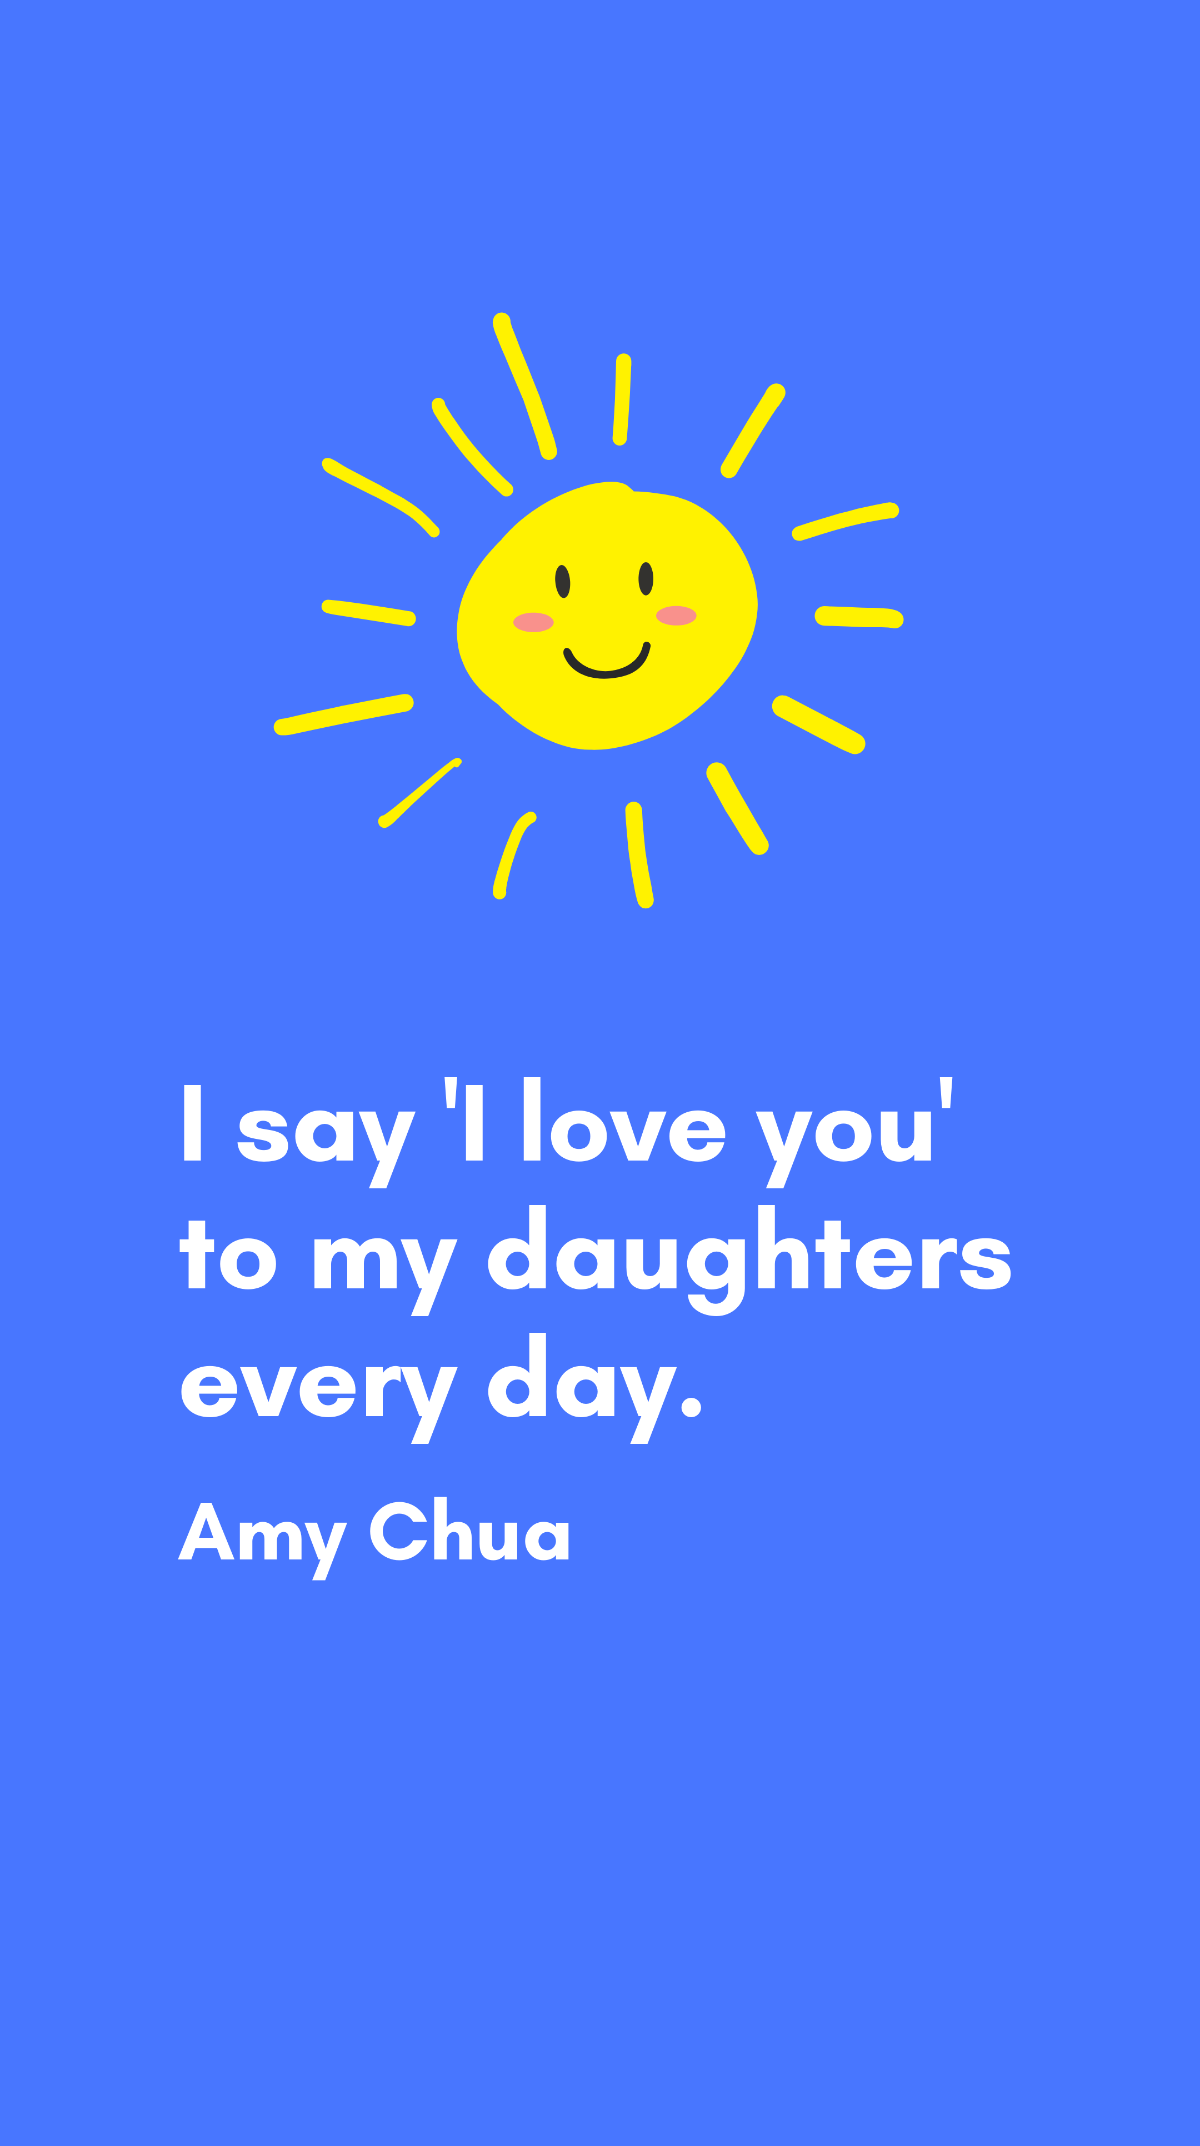 Free Amy Chua - I say 'I love you' to my daughters every day. Template